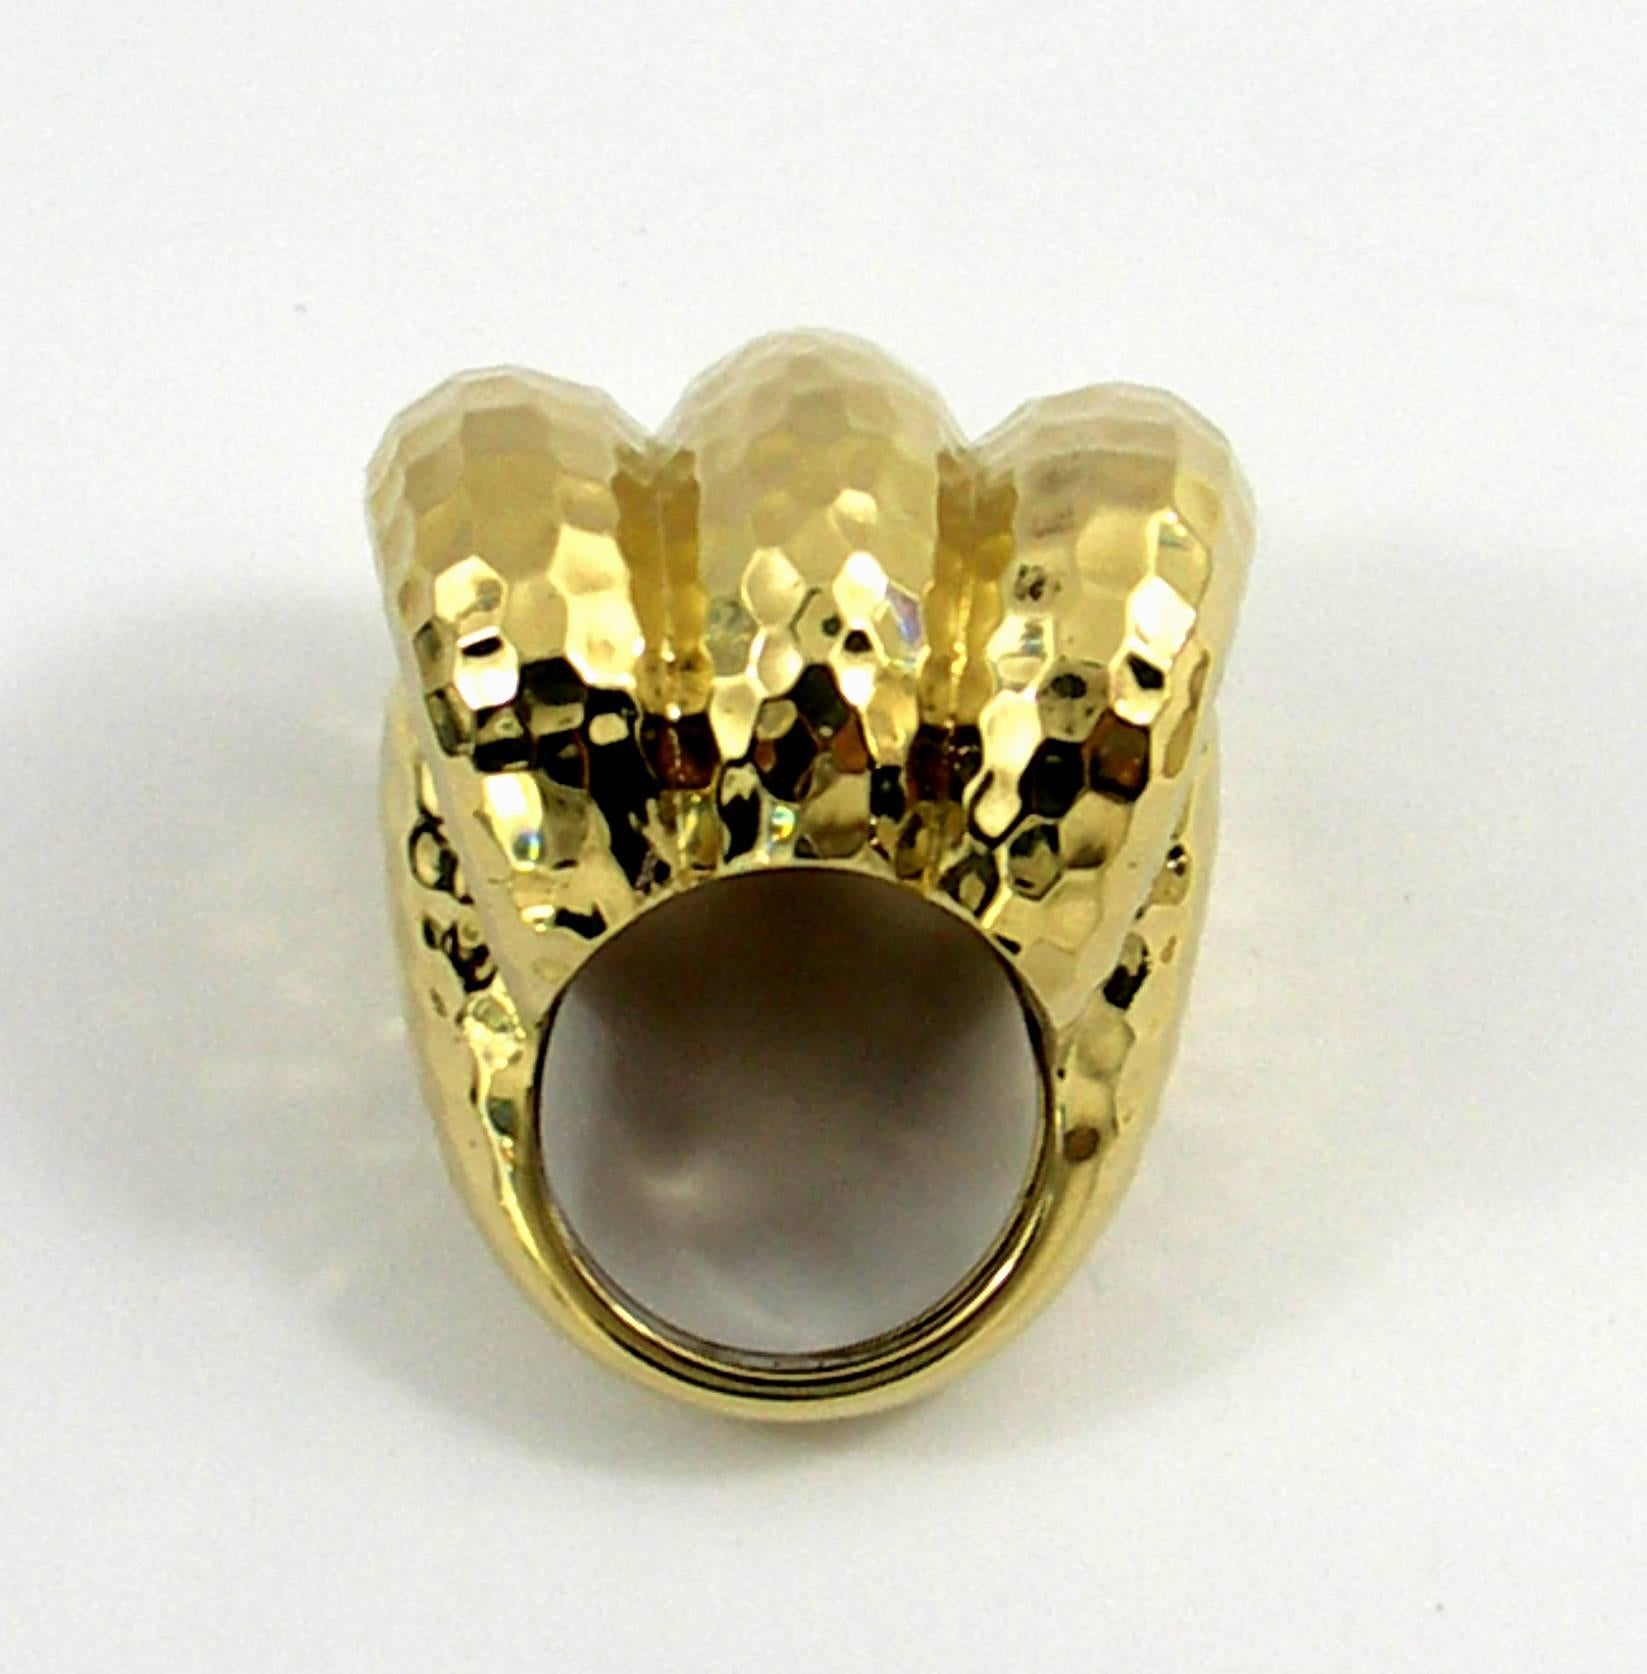 A Large ring measuring 1 inch long, 1 1/4 inches wide, and rising 2/3 of an inch above the finger. A hammered finish is added to this three section, 18K yellow gold ring, to give it a rich golden appearance.  Ring is size 6 1/2 and can be sized.  